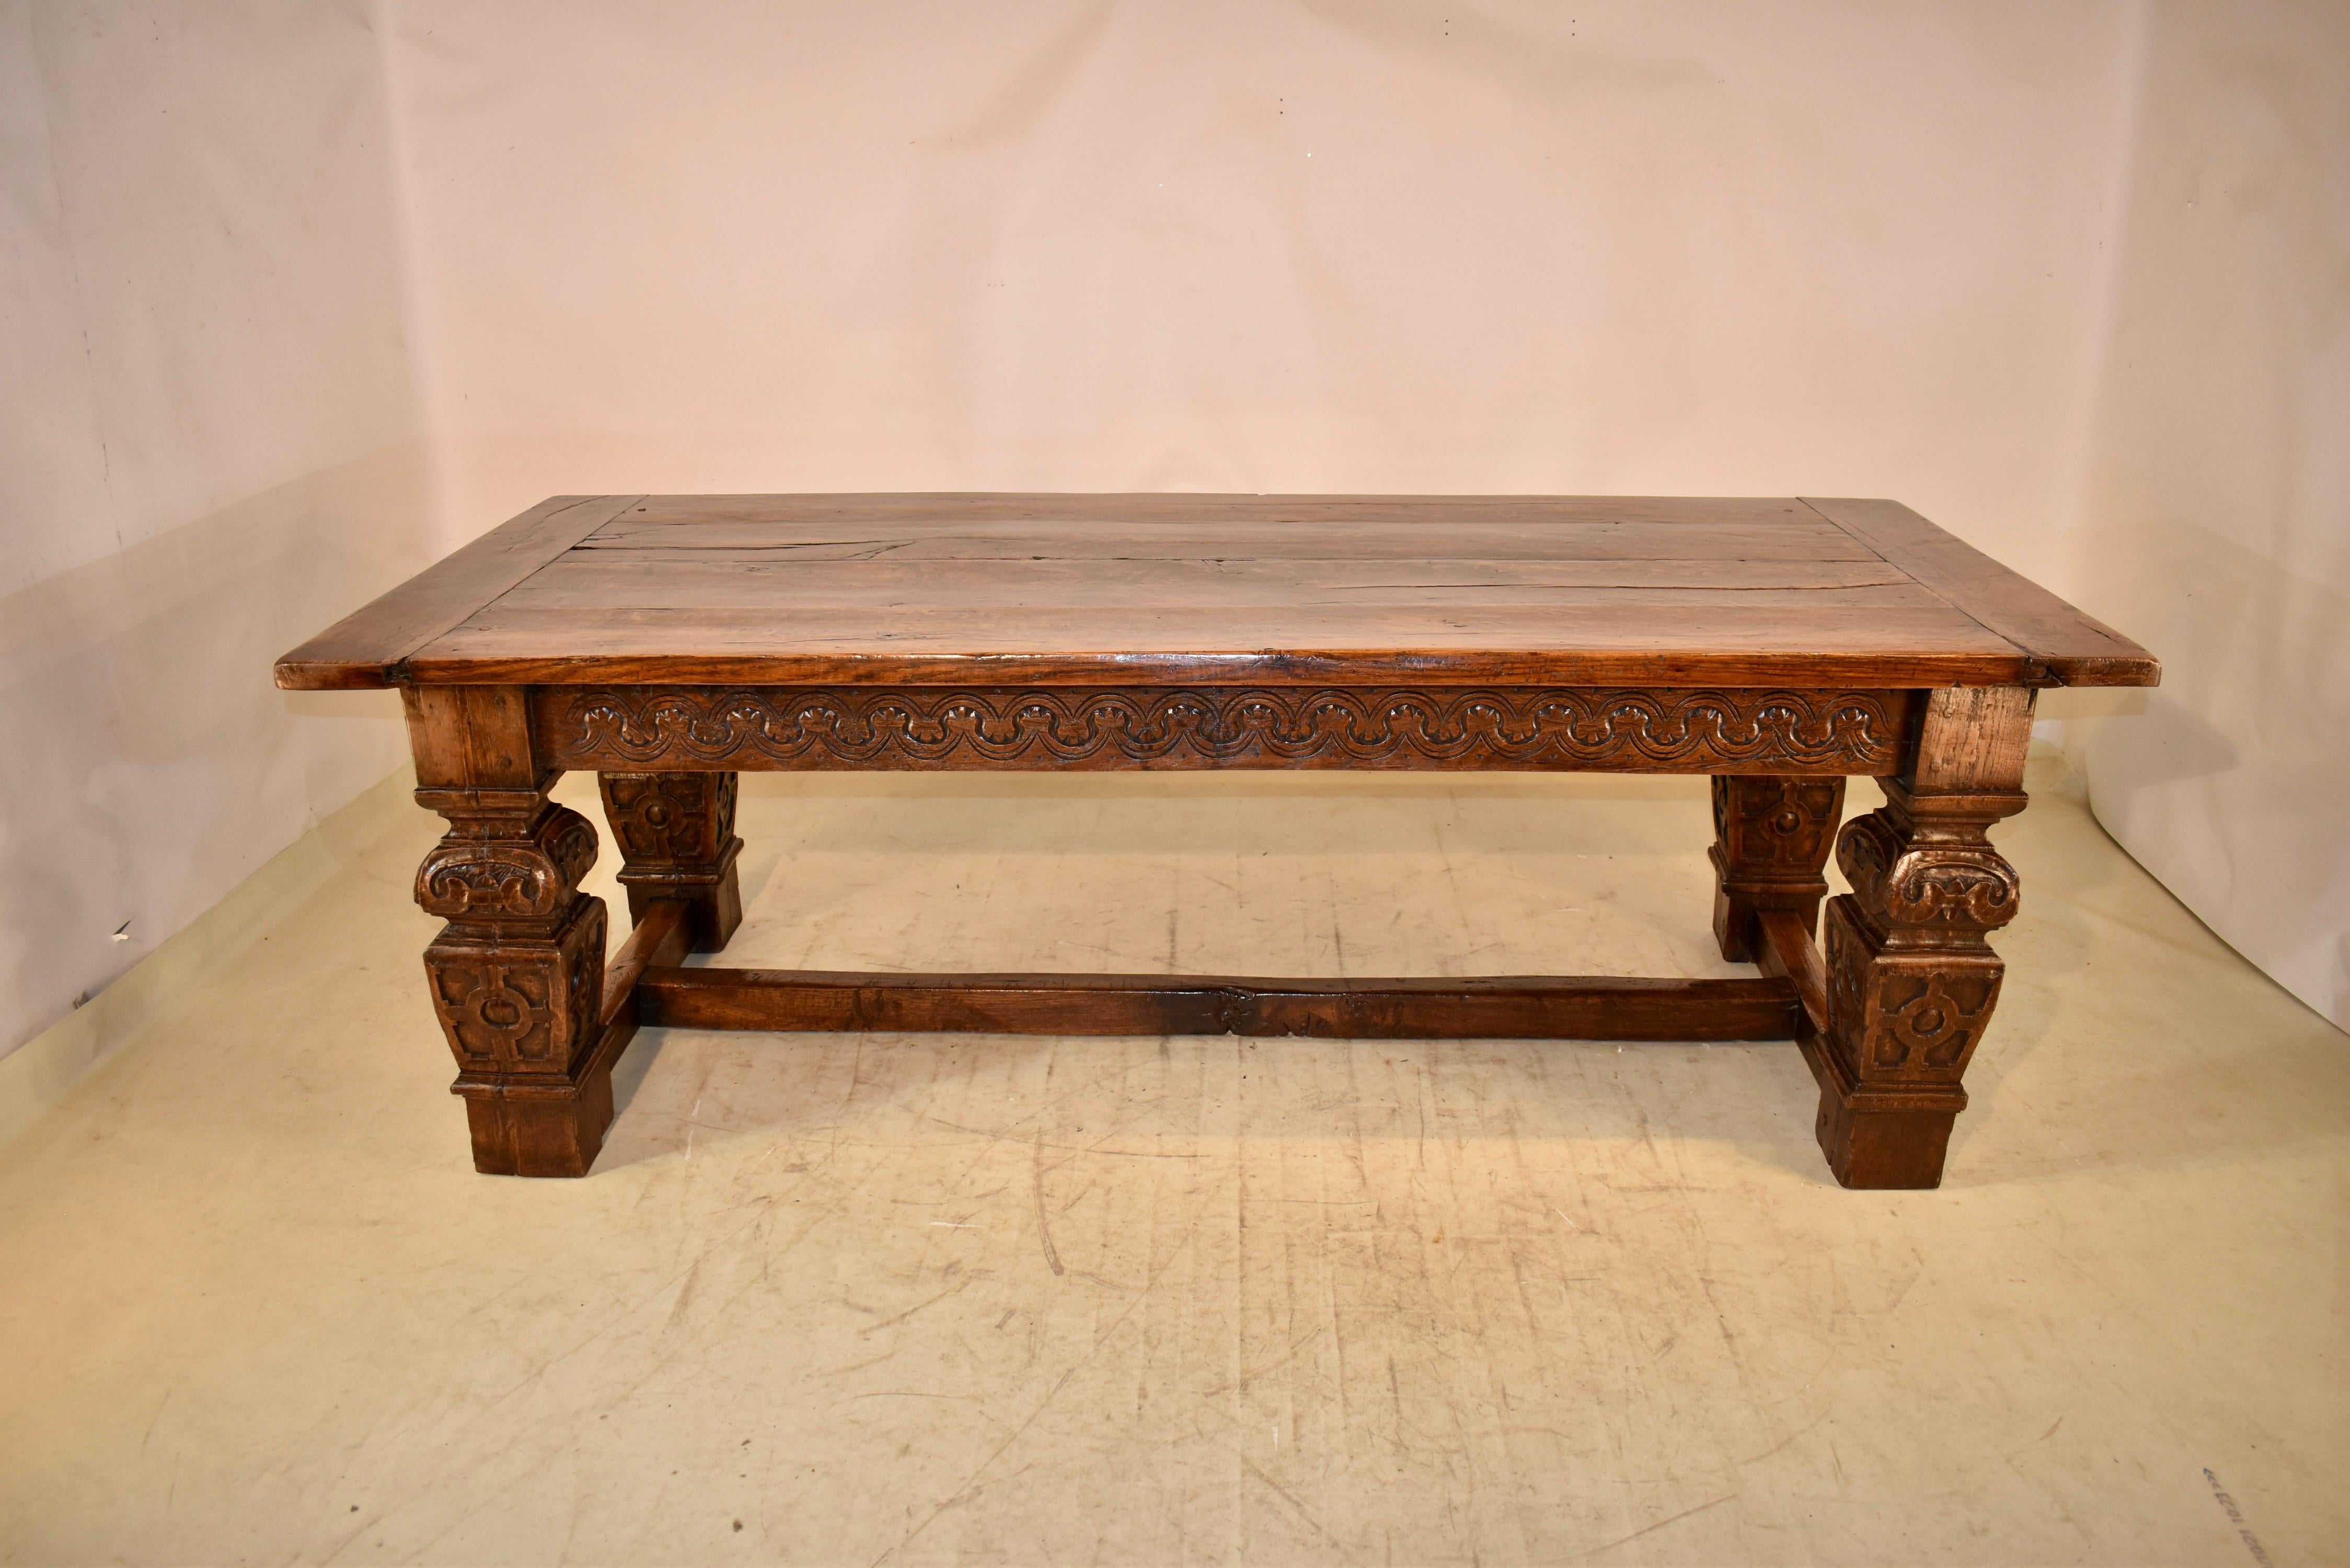 Rare and impressive PERIOD Elizabethan dining table of substantial size.  The top is made from four planks, and is banded at the ends to prevent shrinkage.  The apron is hand carved decorated.  The legs are massive, and are hand carved and turned. 